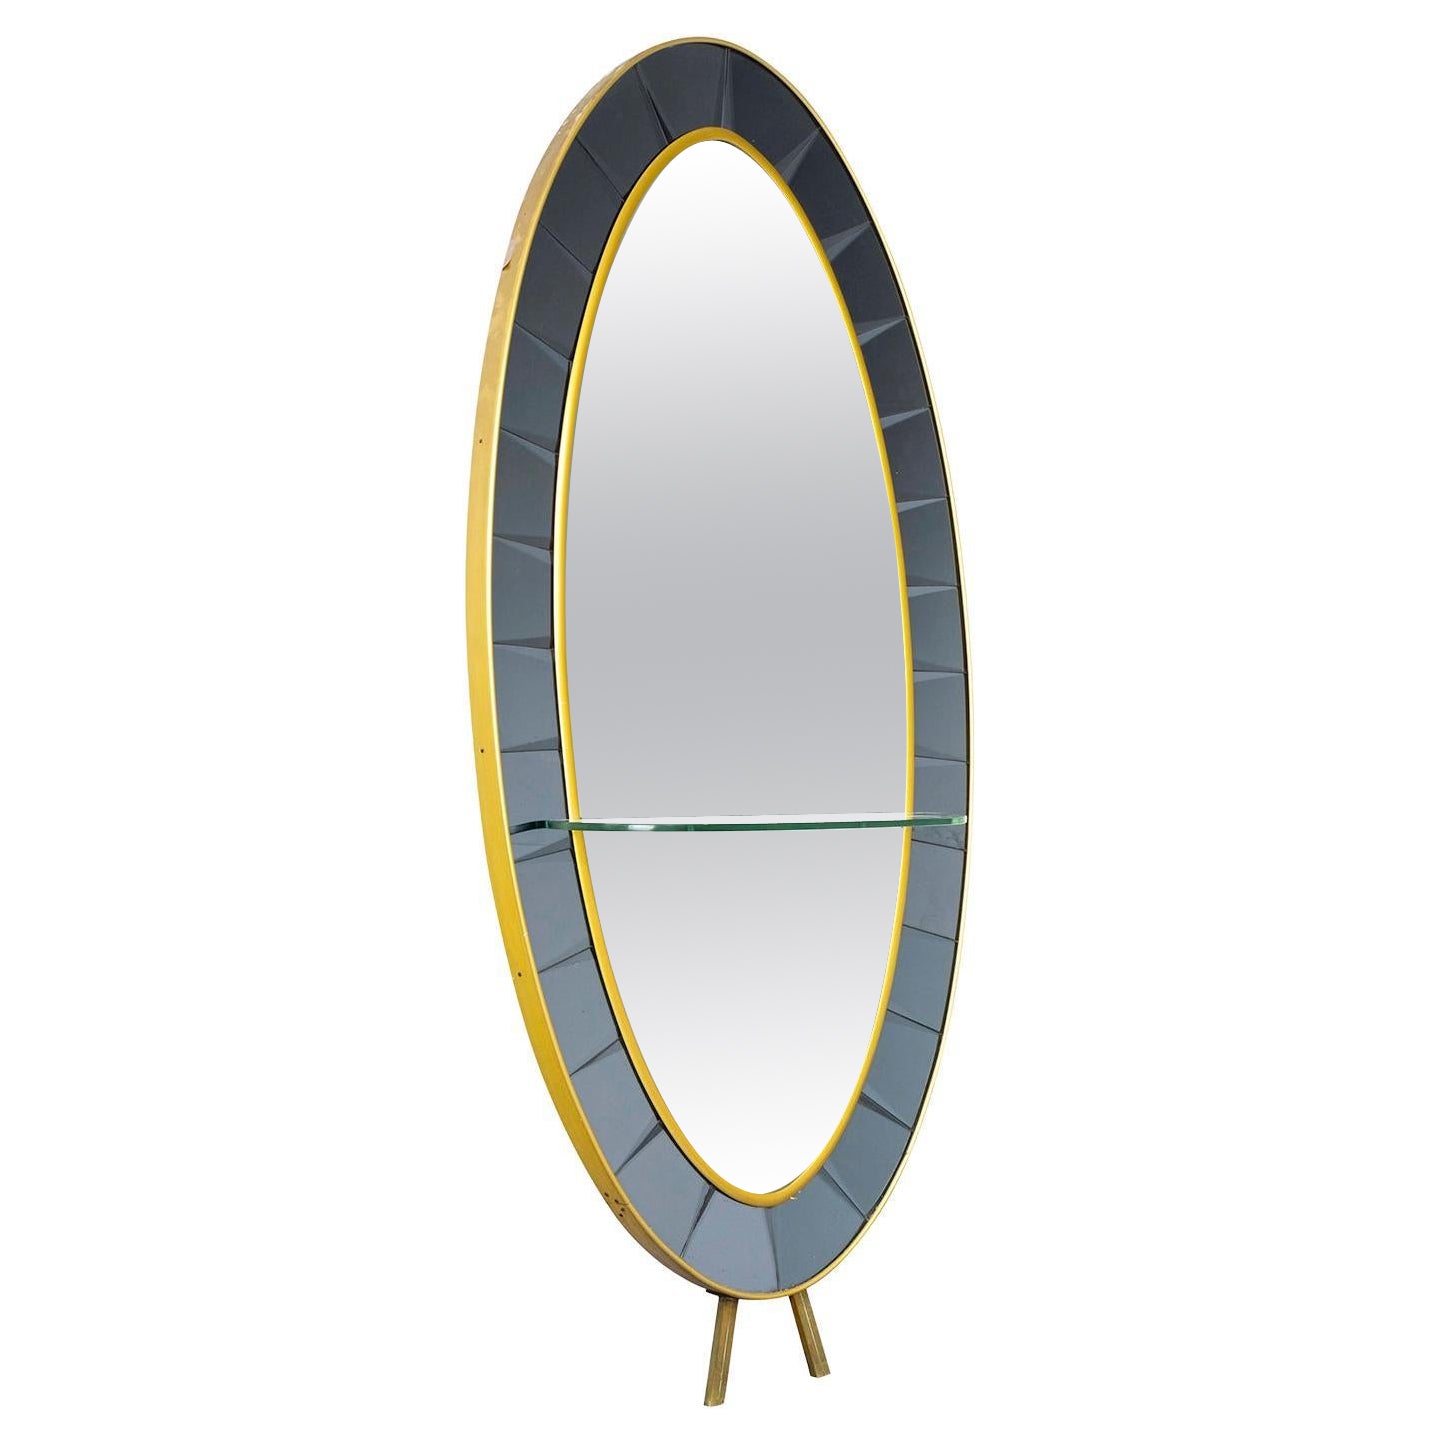 Cristal Arte Floor Mirrors and Full-Length Mirrors